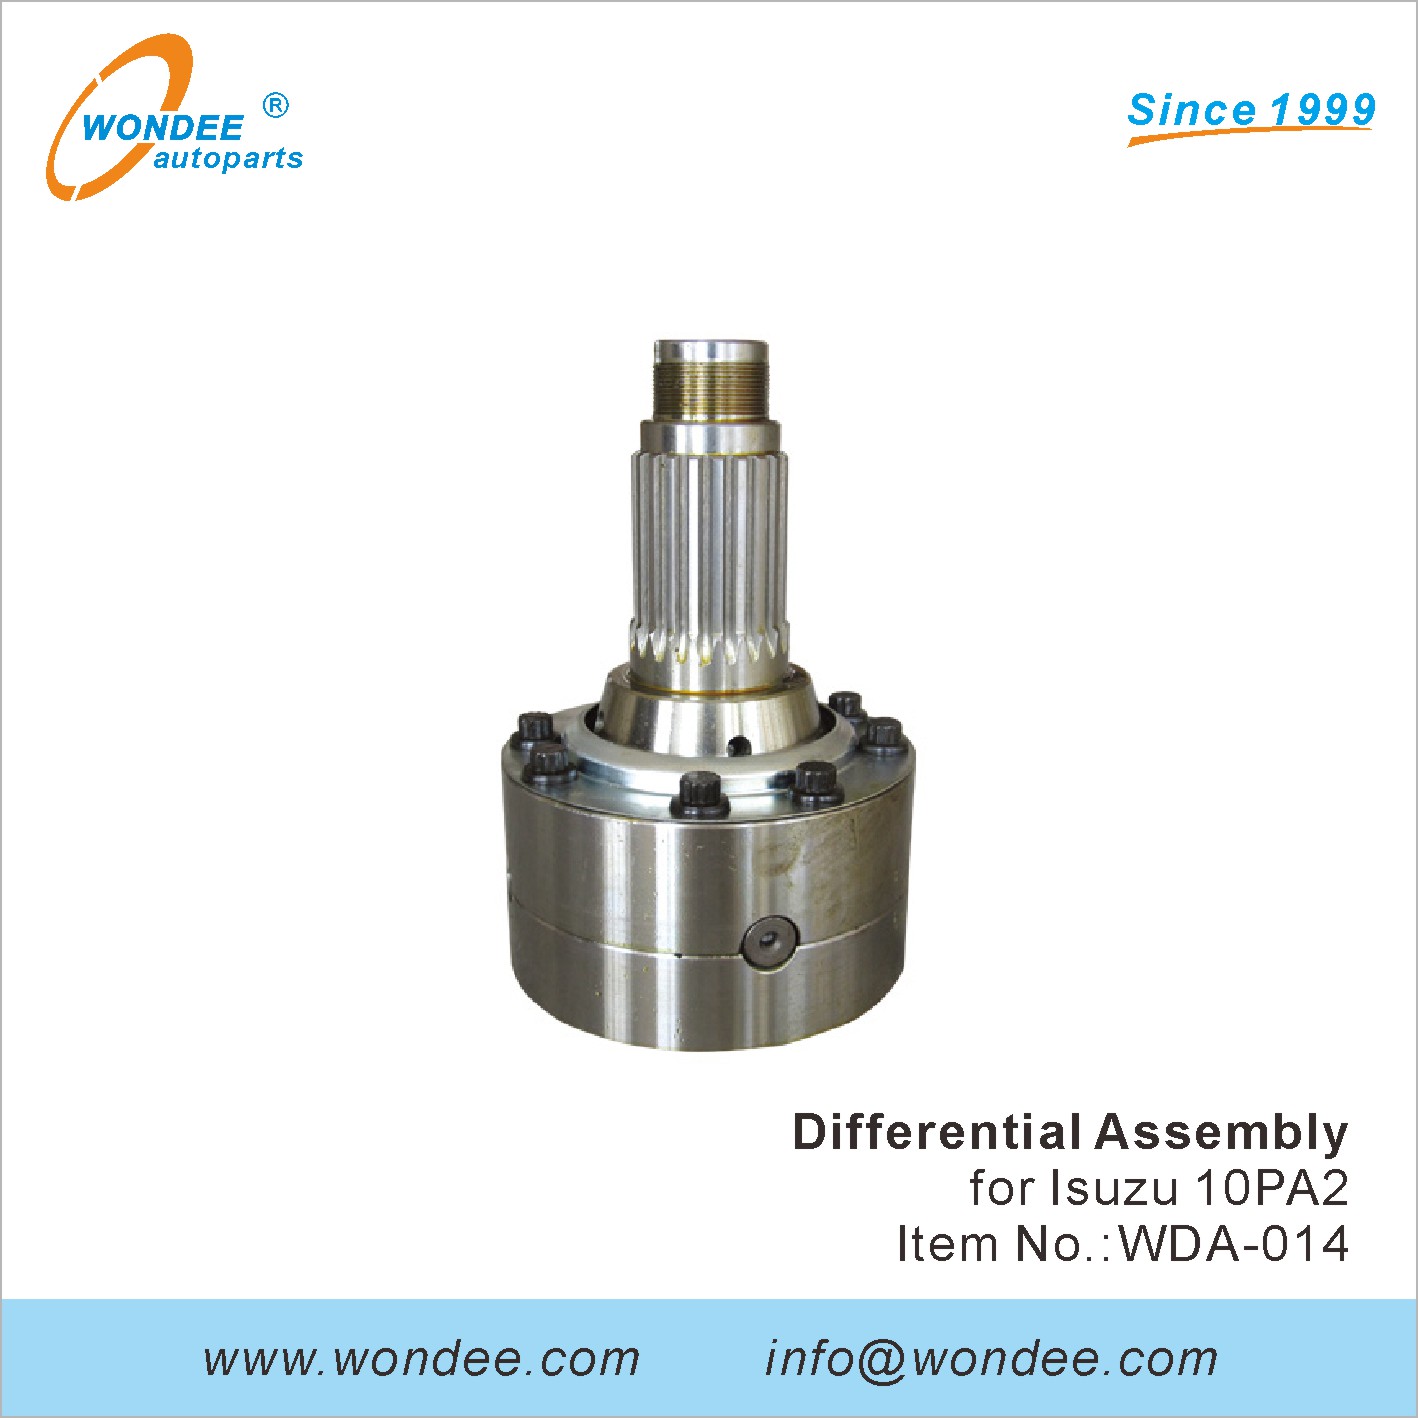 WONDEE differential assembly (14)